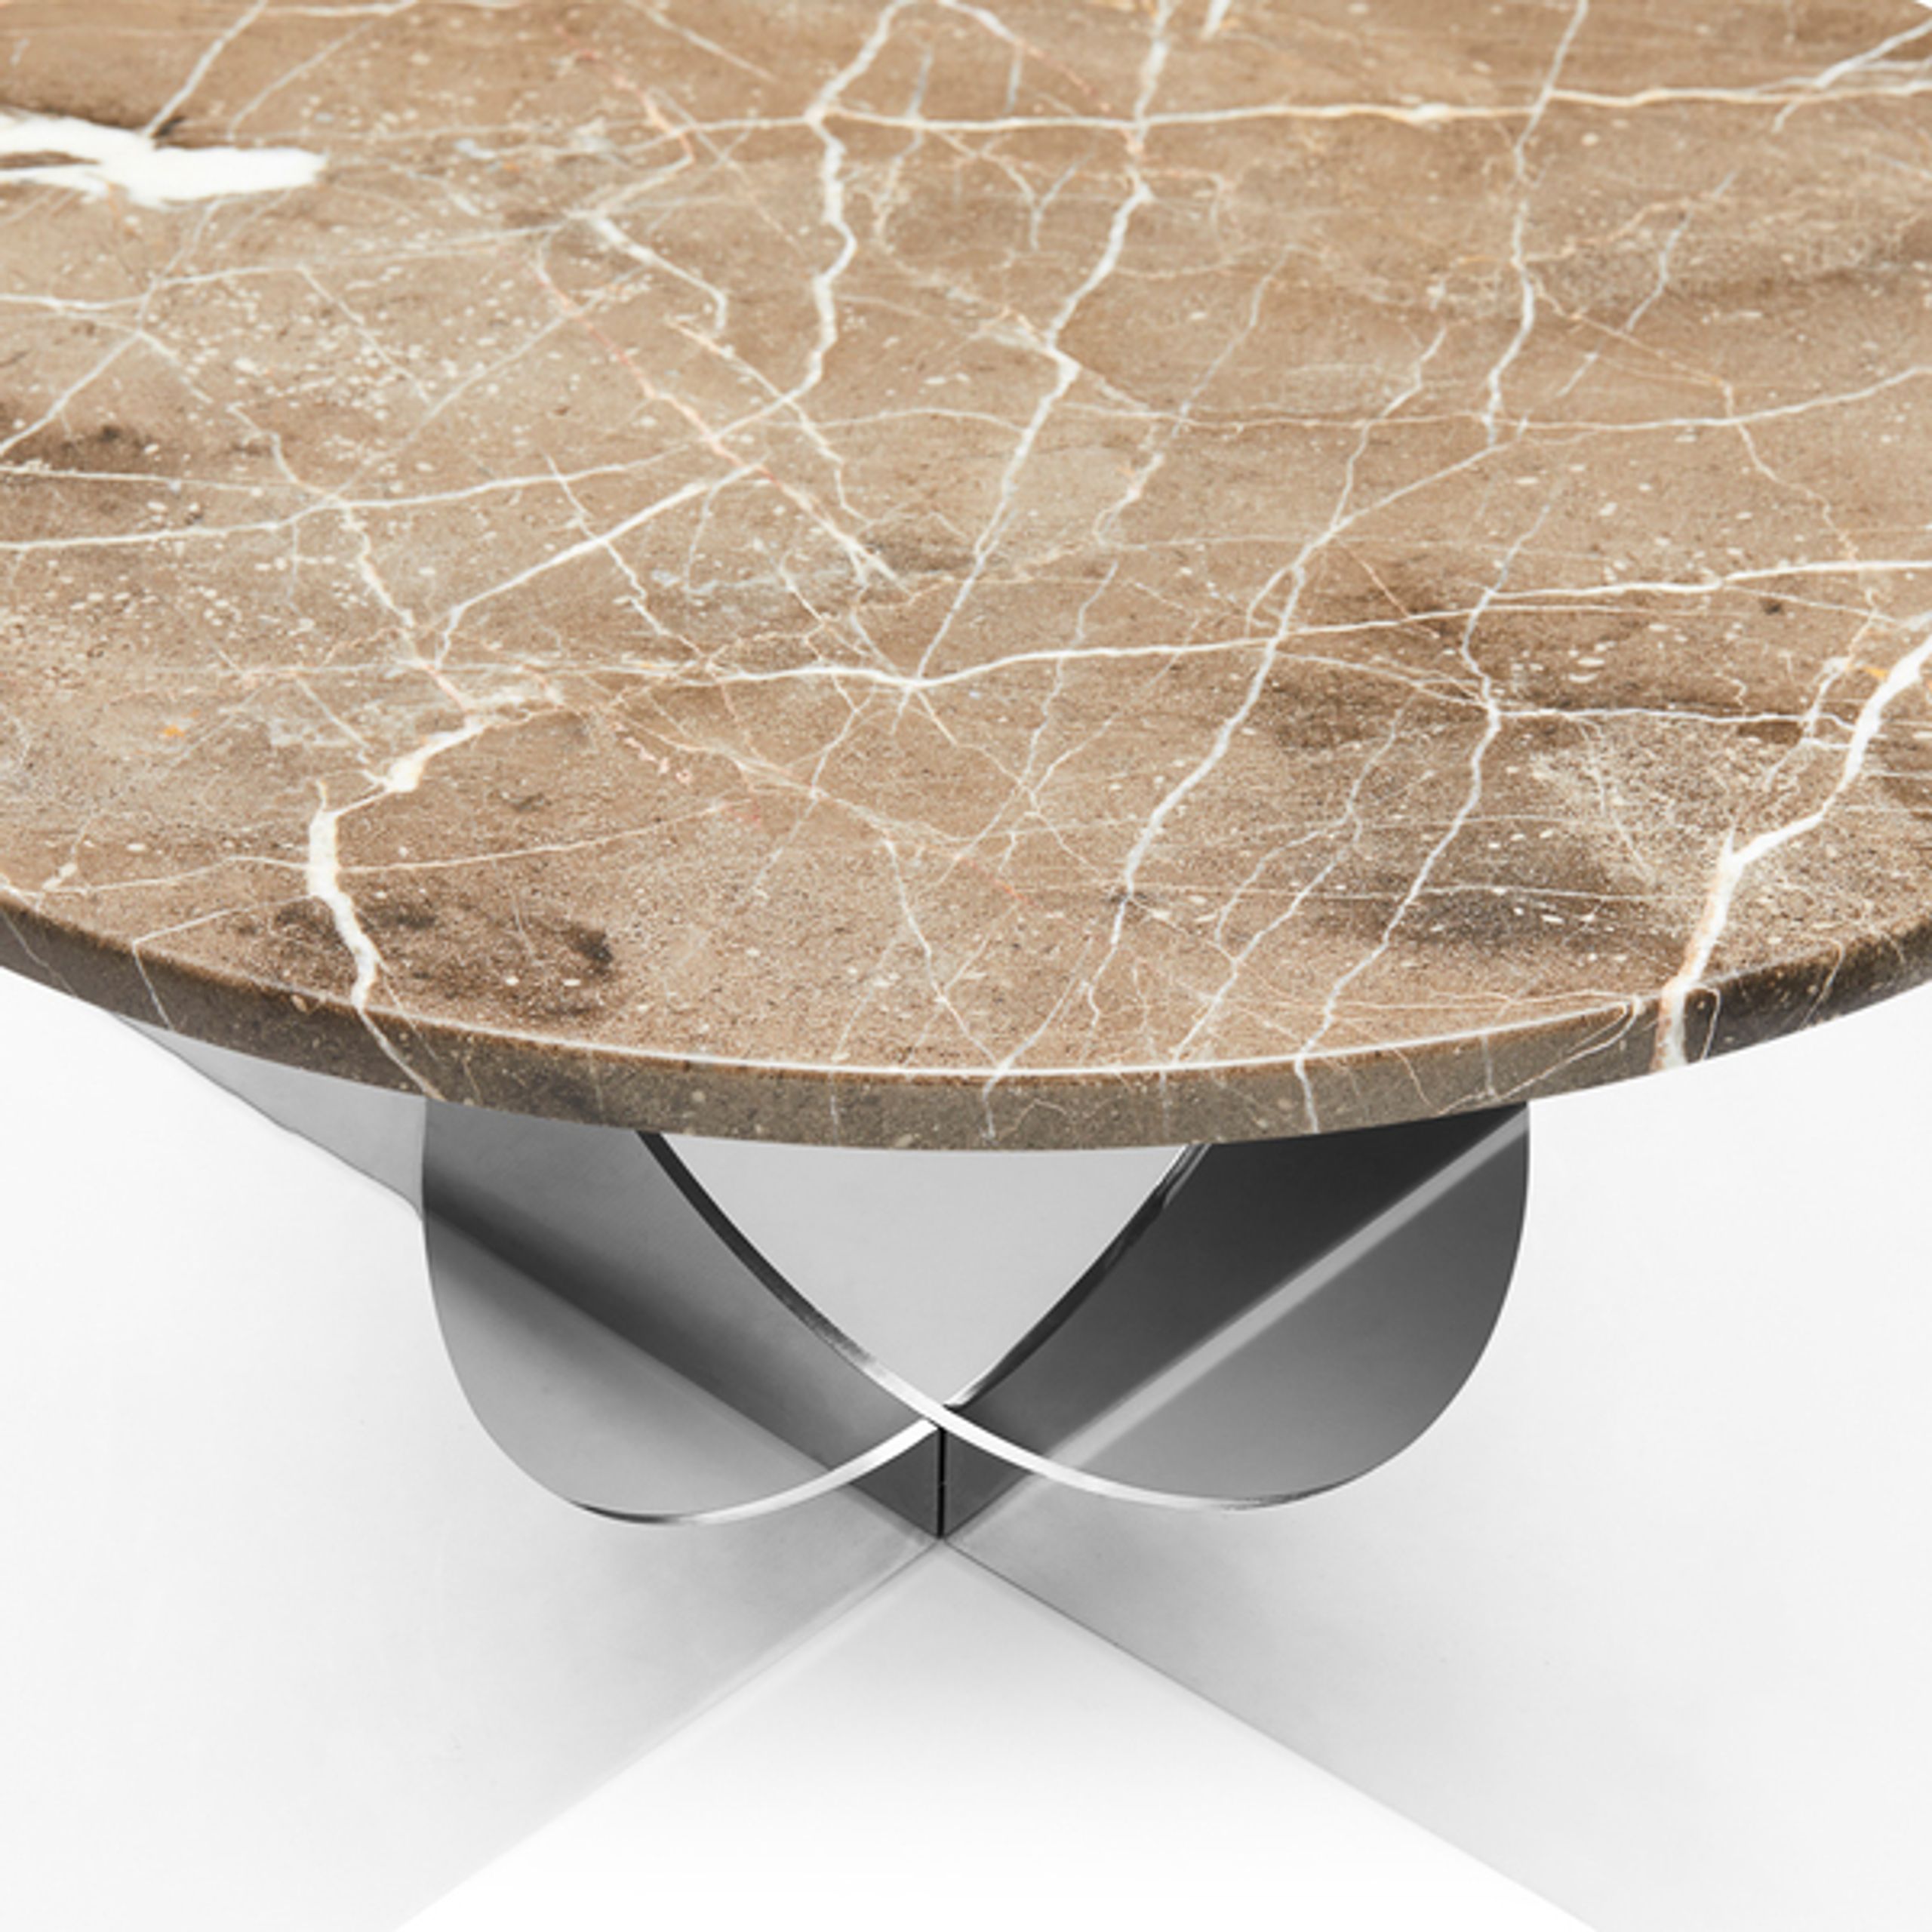 Design By Us - Sofabord - This Is Art Table - Marble - Grey - Chrome